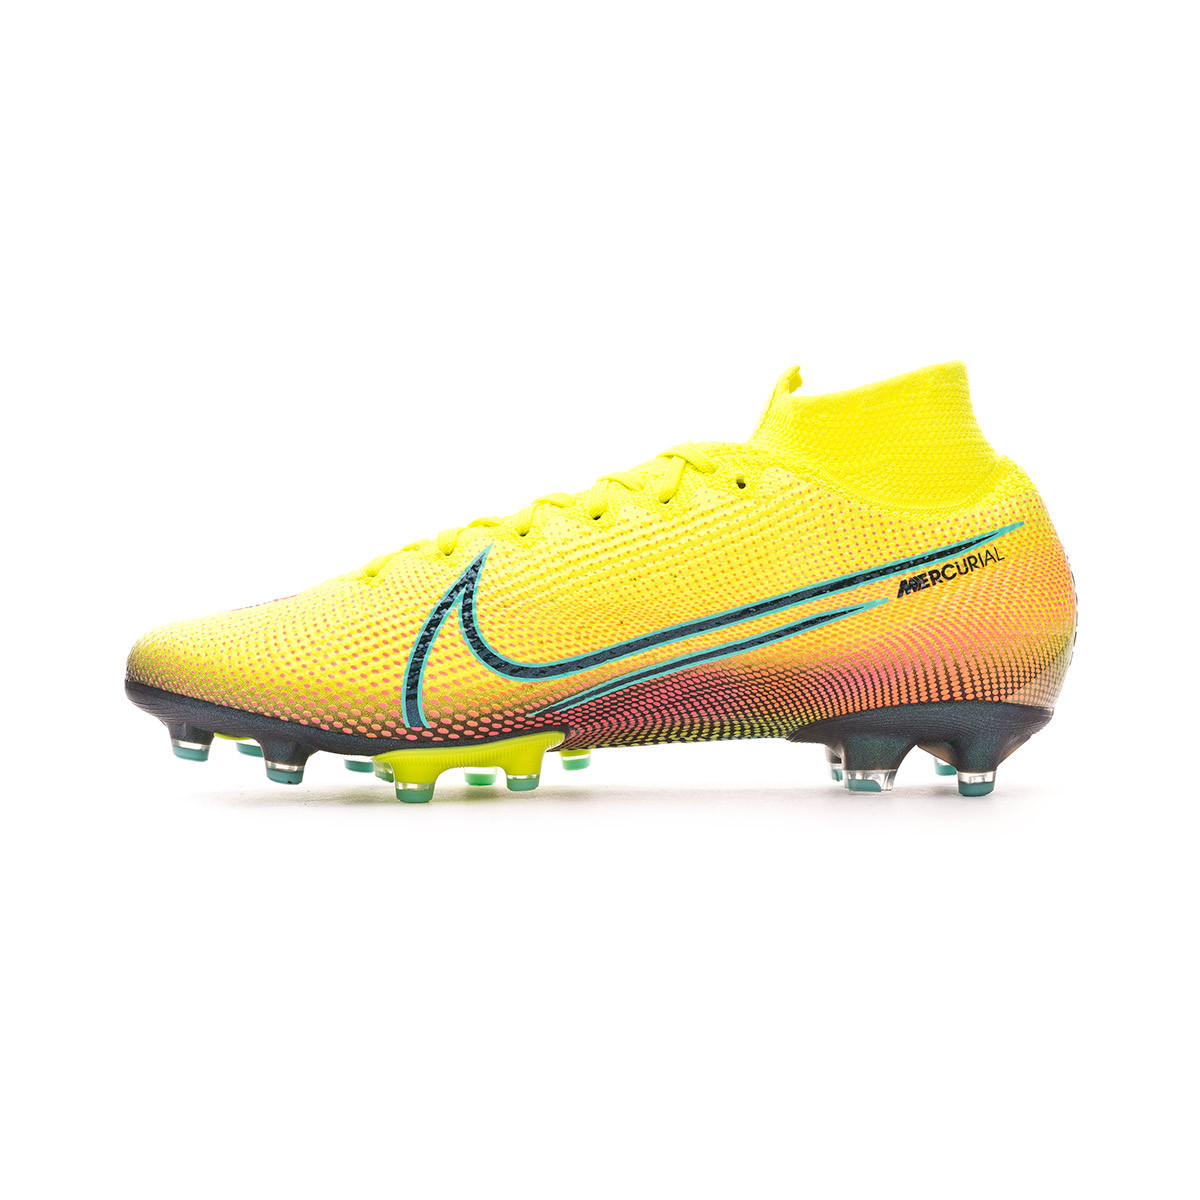 Nike Mercurial Superfly 7 Elite FG from 199.99 Compara.